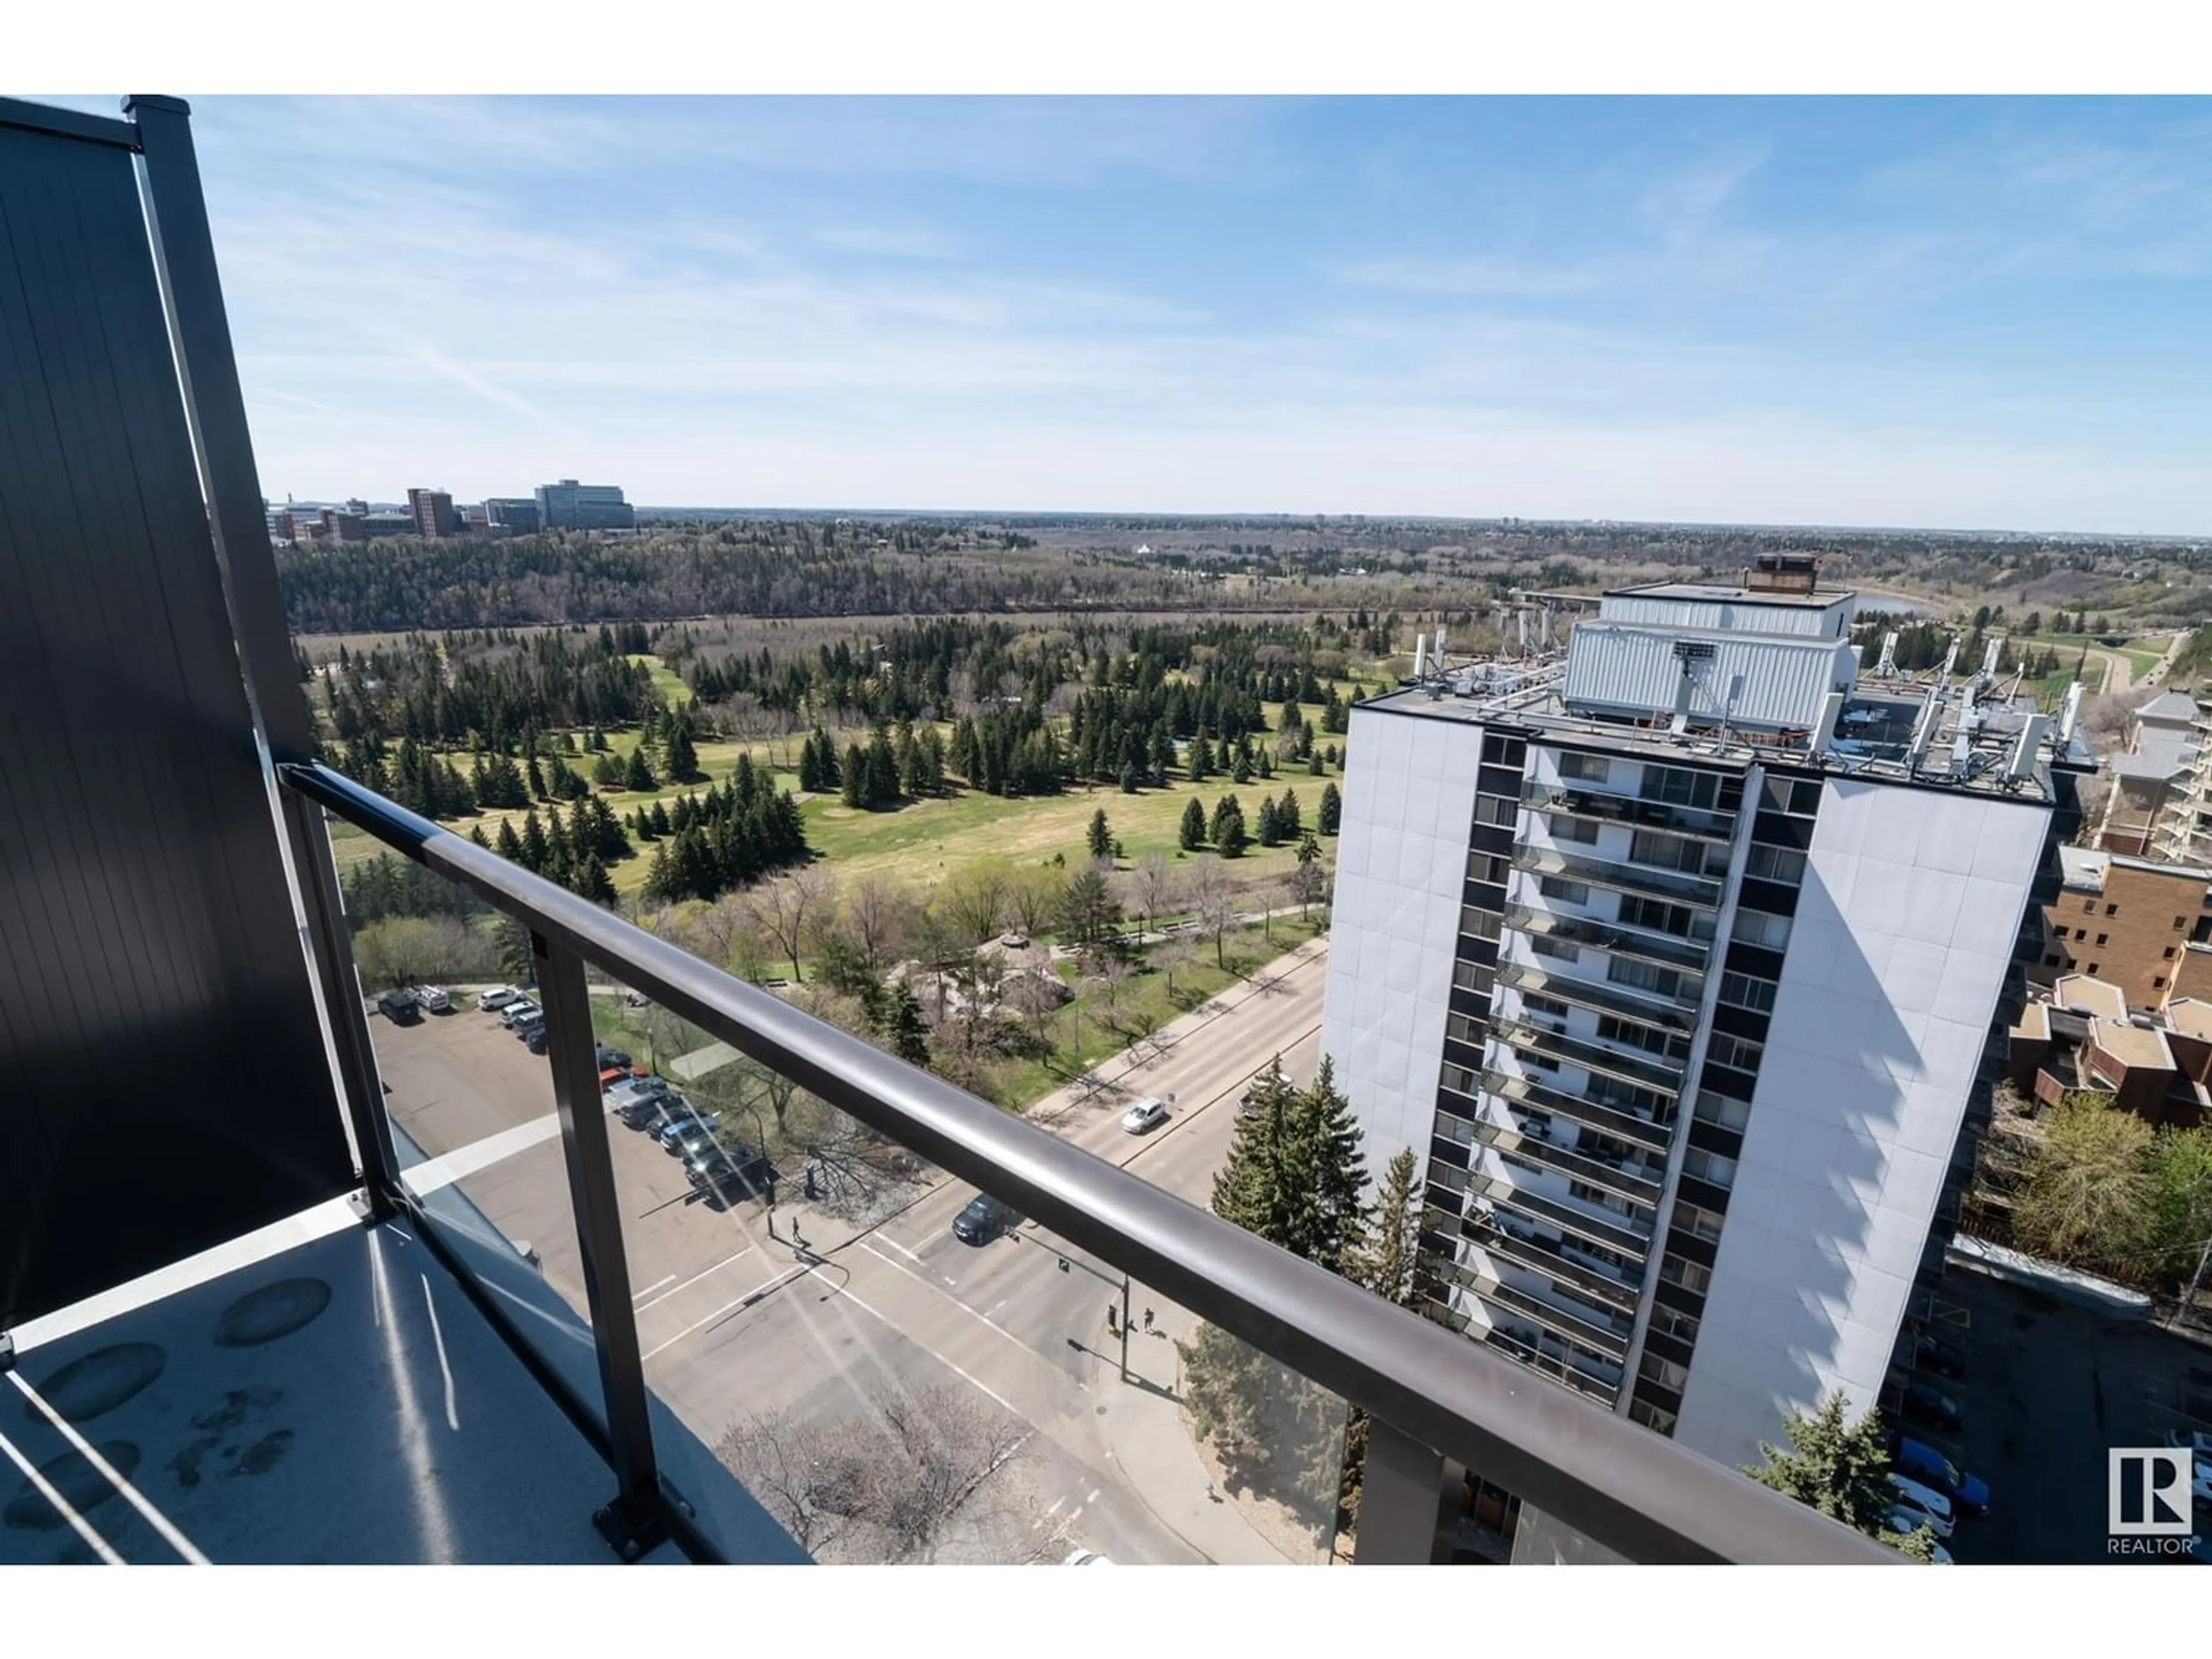 A pic from exterior of the house or condo for #1807 10011 116 ST NW, Edmonton Alberta T5K1V4